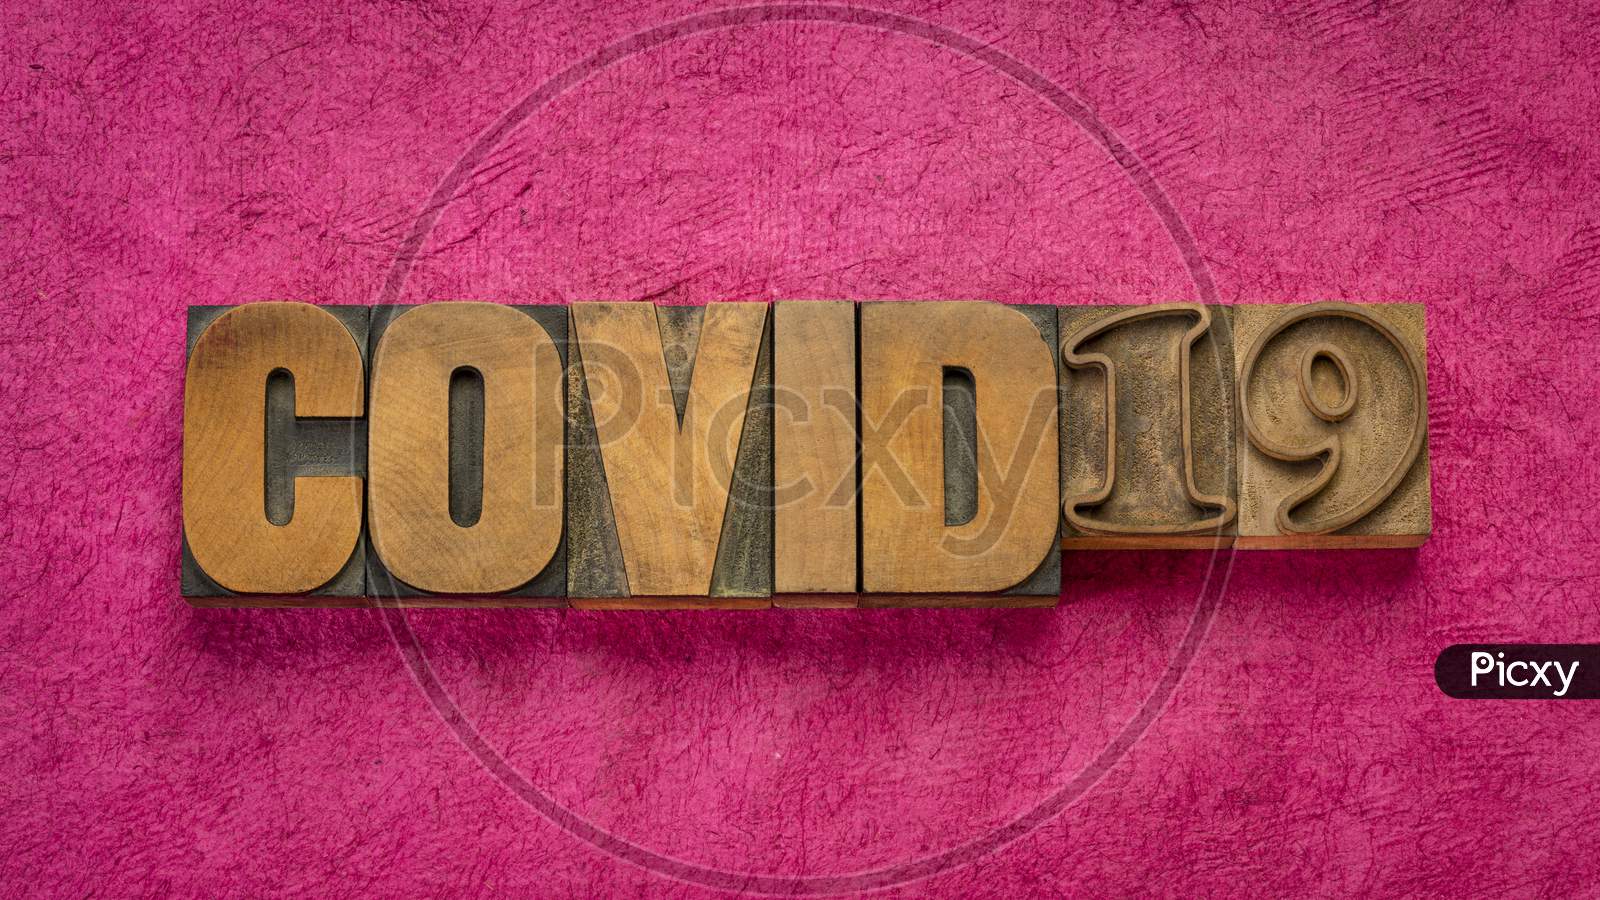 Covid-19 Word Abstract In Vintage Letterpress Wood Type Against Handmade Bark Paper, , Coronavirus Outbreak And Pandemic Concept